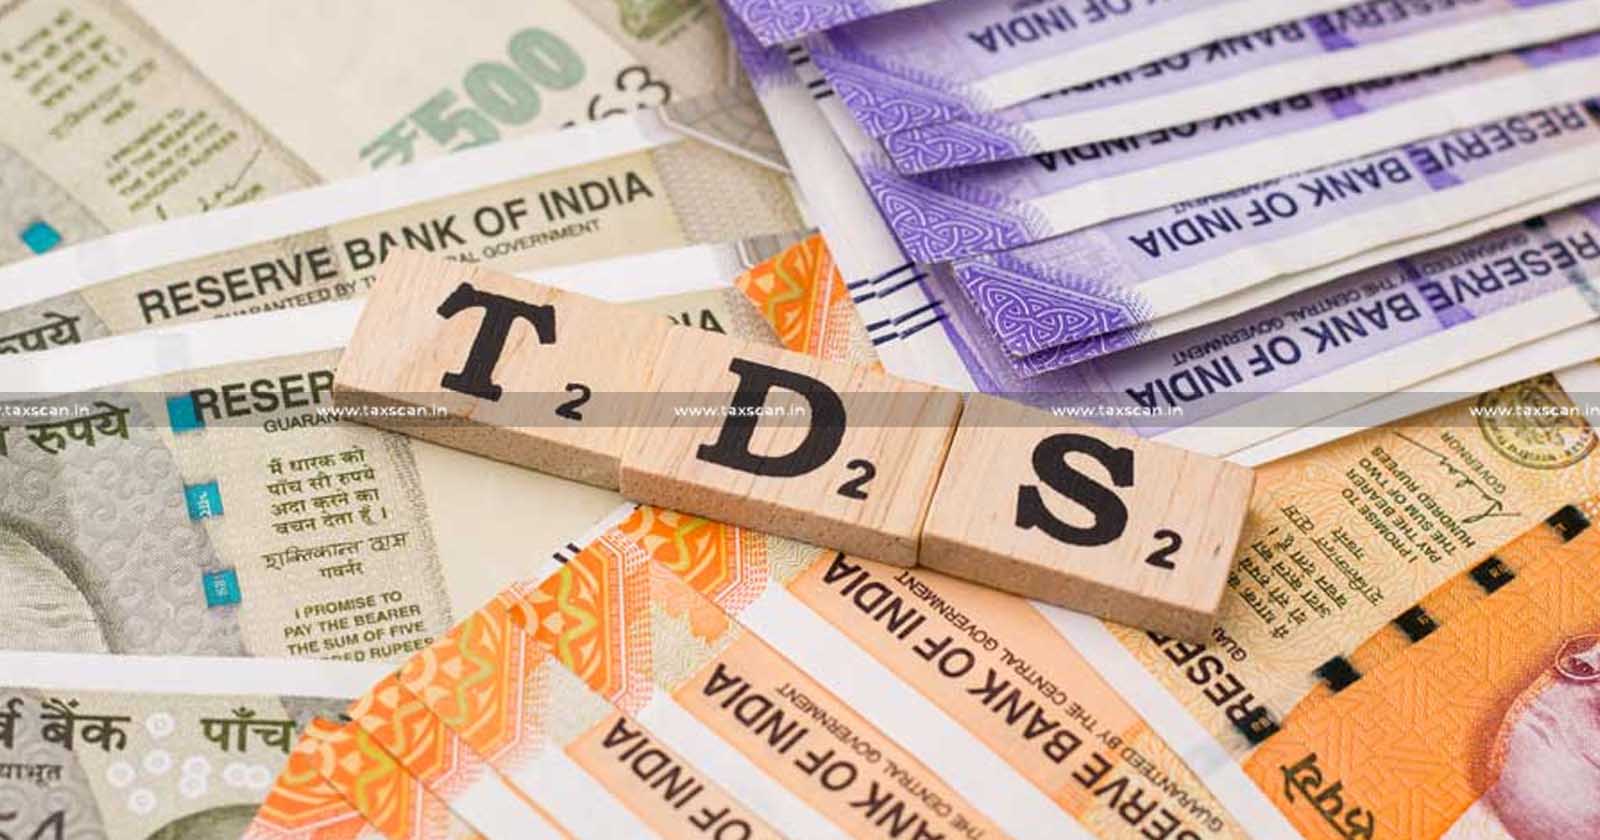 TDS - Payment - of - Rent - Maintenance - Charges - ITAT - TAXSCAN